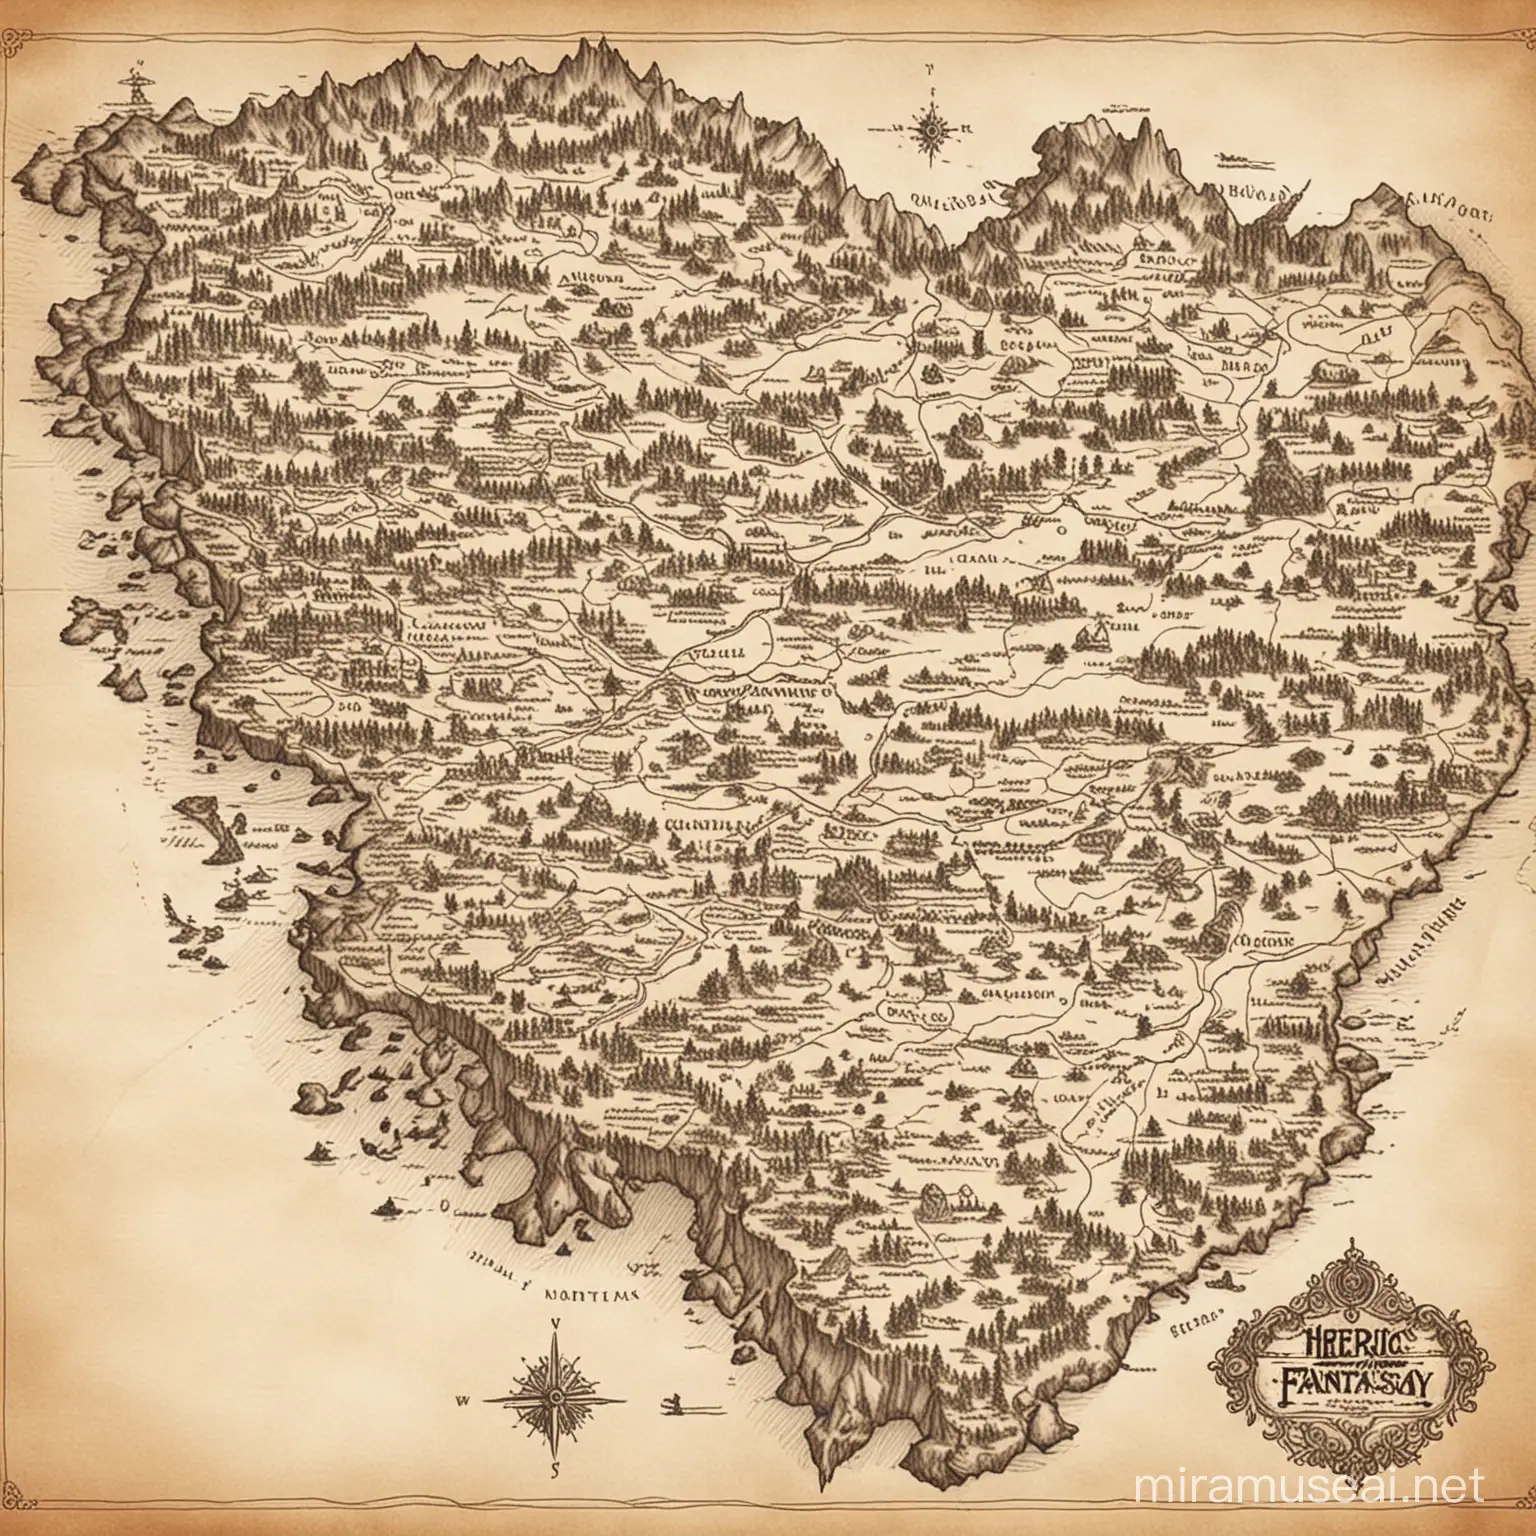 Heroic Fantasy Continent Map Illustrated Cartography for Epic Adventures